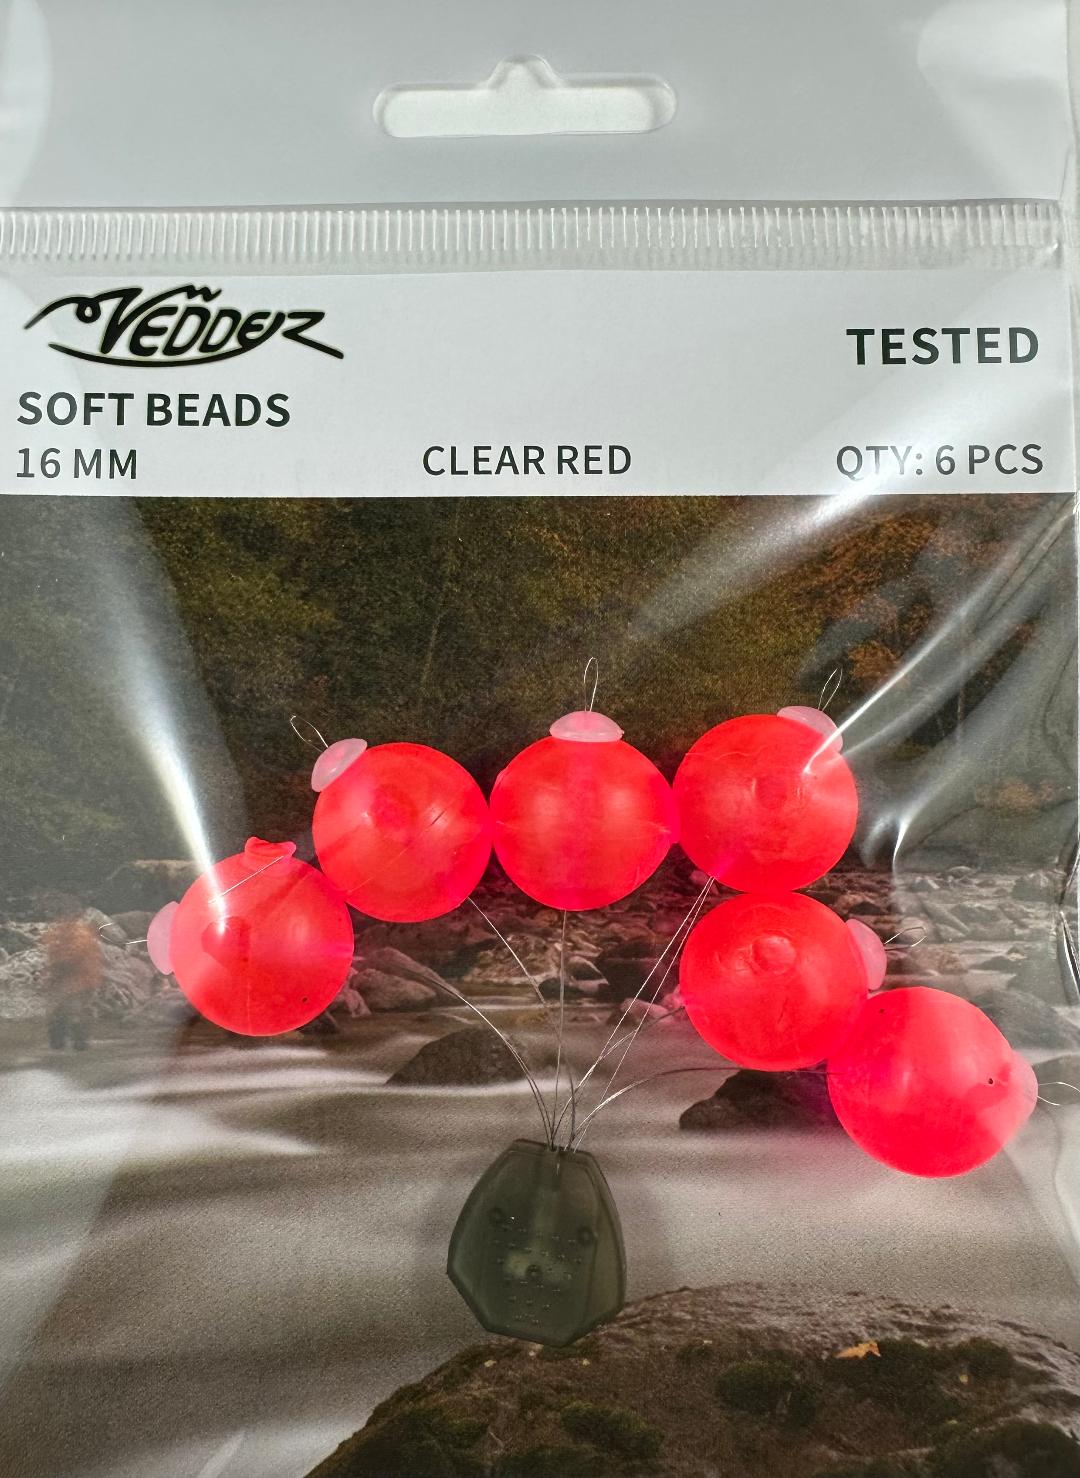 VSB-CR 16 Vedder 16 mm Clear red soft beads x 6 with stoppers x 6